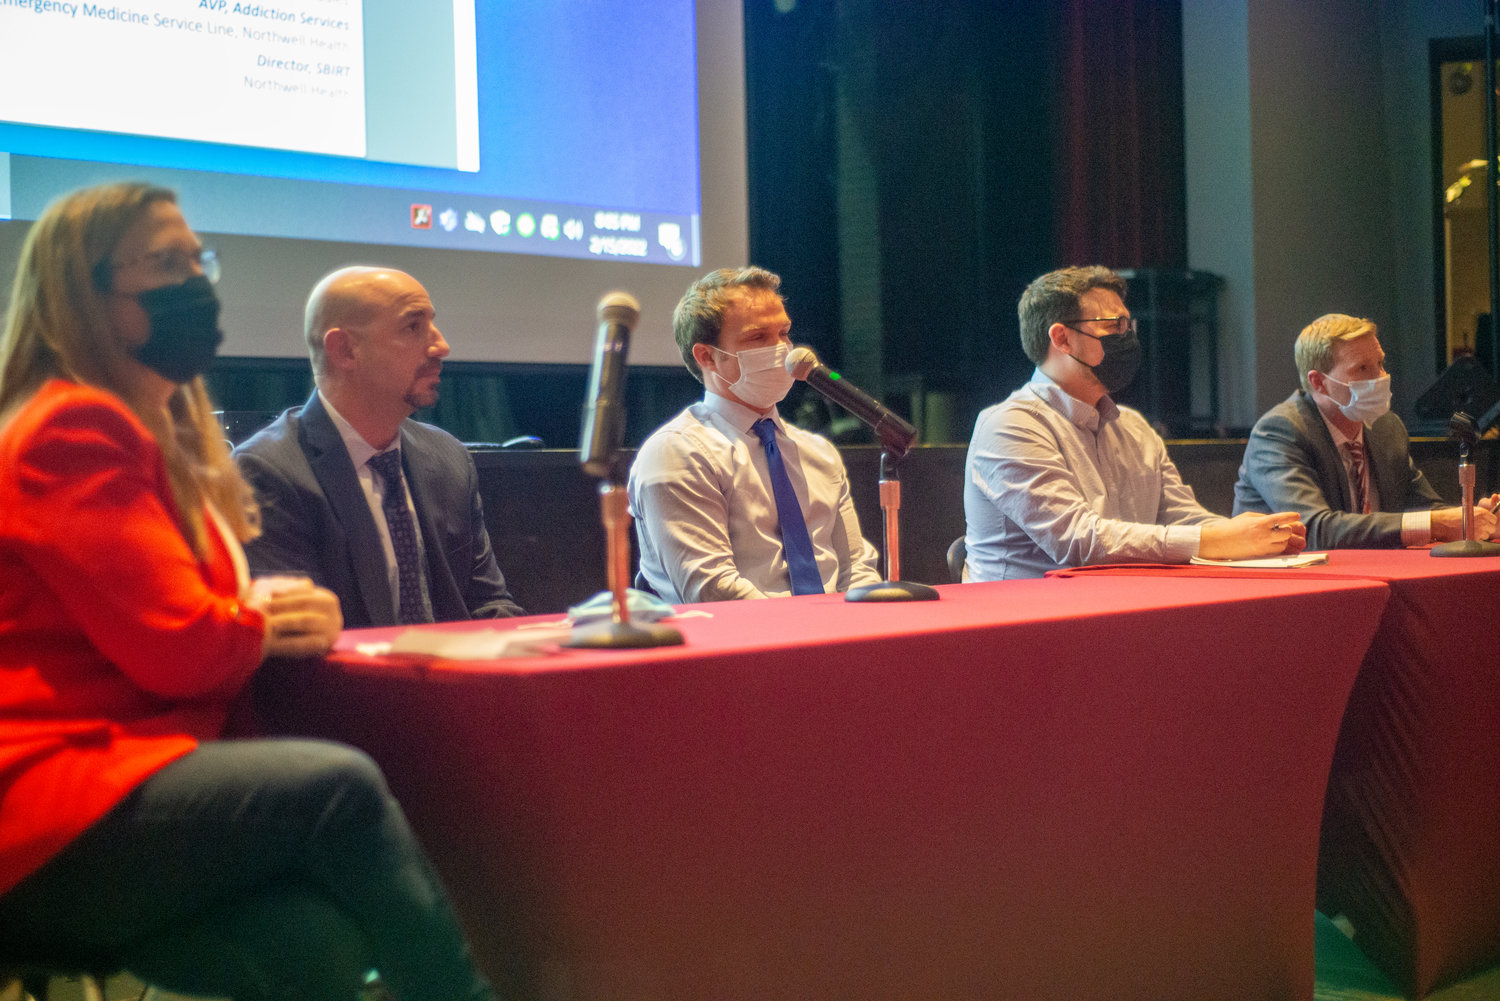 The panel for the discussion on fentanyl at North Shore High School on Feb. 15 included, from left, Alison Camardella, Matthew Landman, Dr. Zachary Oliff, Adam Birkenstock and Dan Doherty.